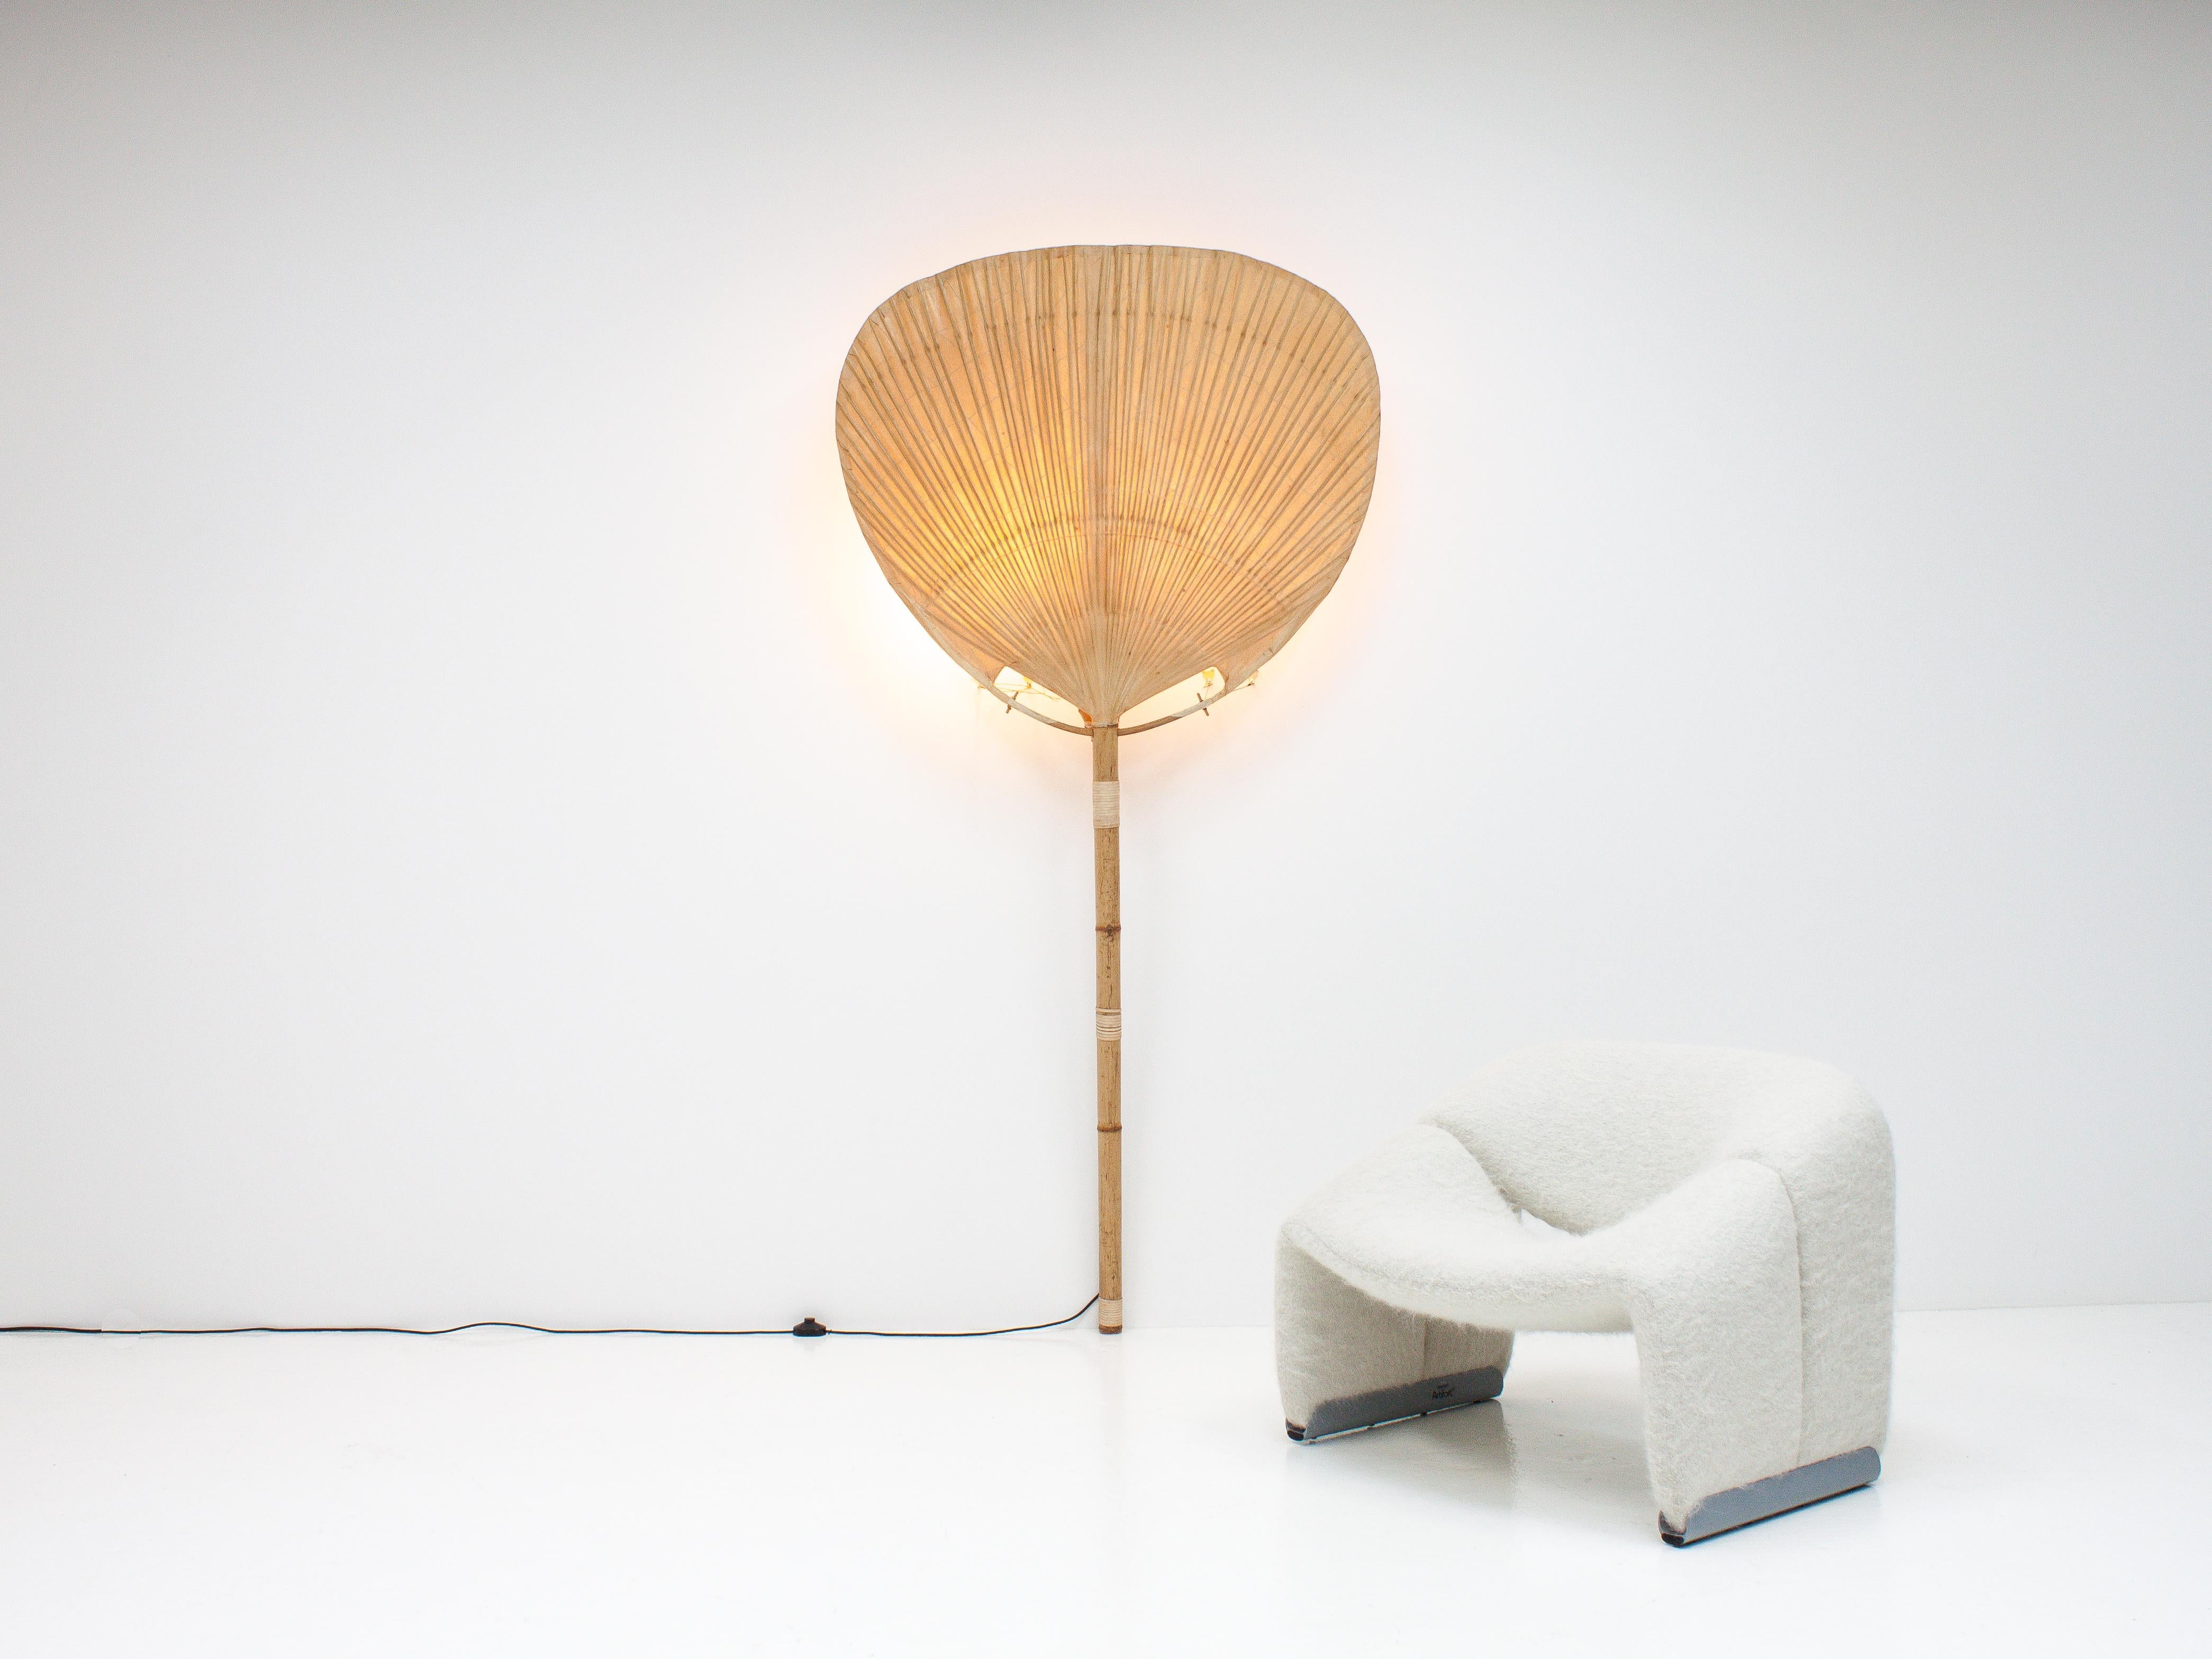 An Ingo Maurer “Uchiwa I” large floor/wall lamp for M Design, Germany, 1970s.

Arguably the most spectacular of the 1970s Ingo Maurer ‘Uchiwa’ range, a hand made floor lamp standing some 7 feet high/2.2m, named the “Uchiwa I”, uchiwa being